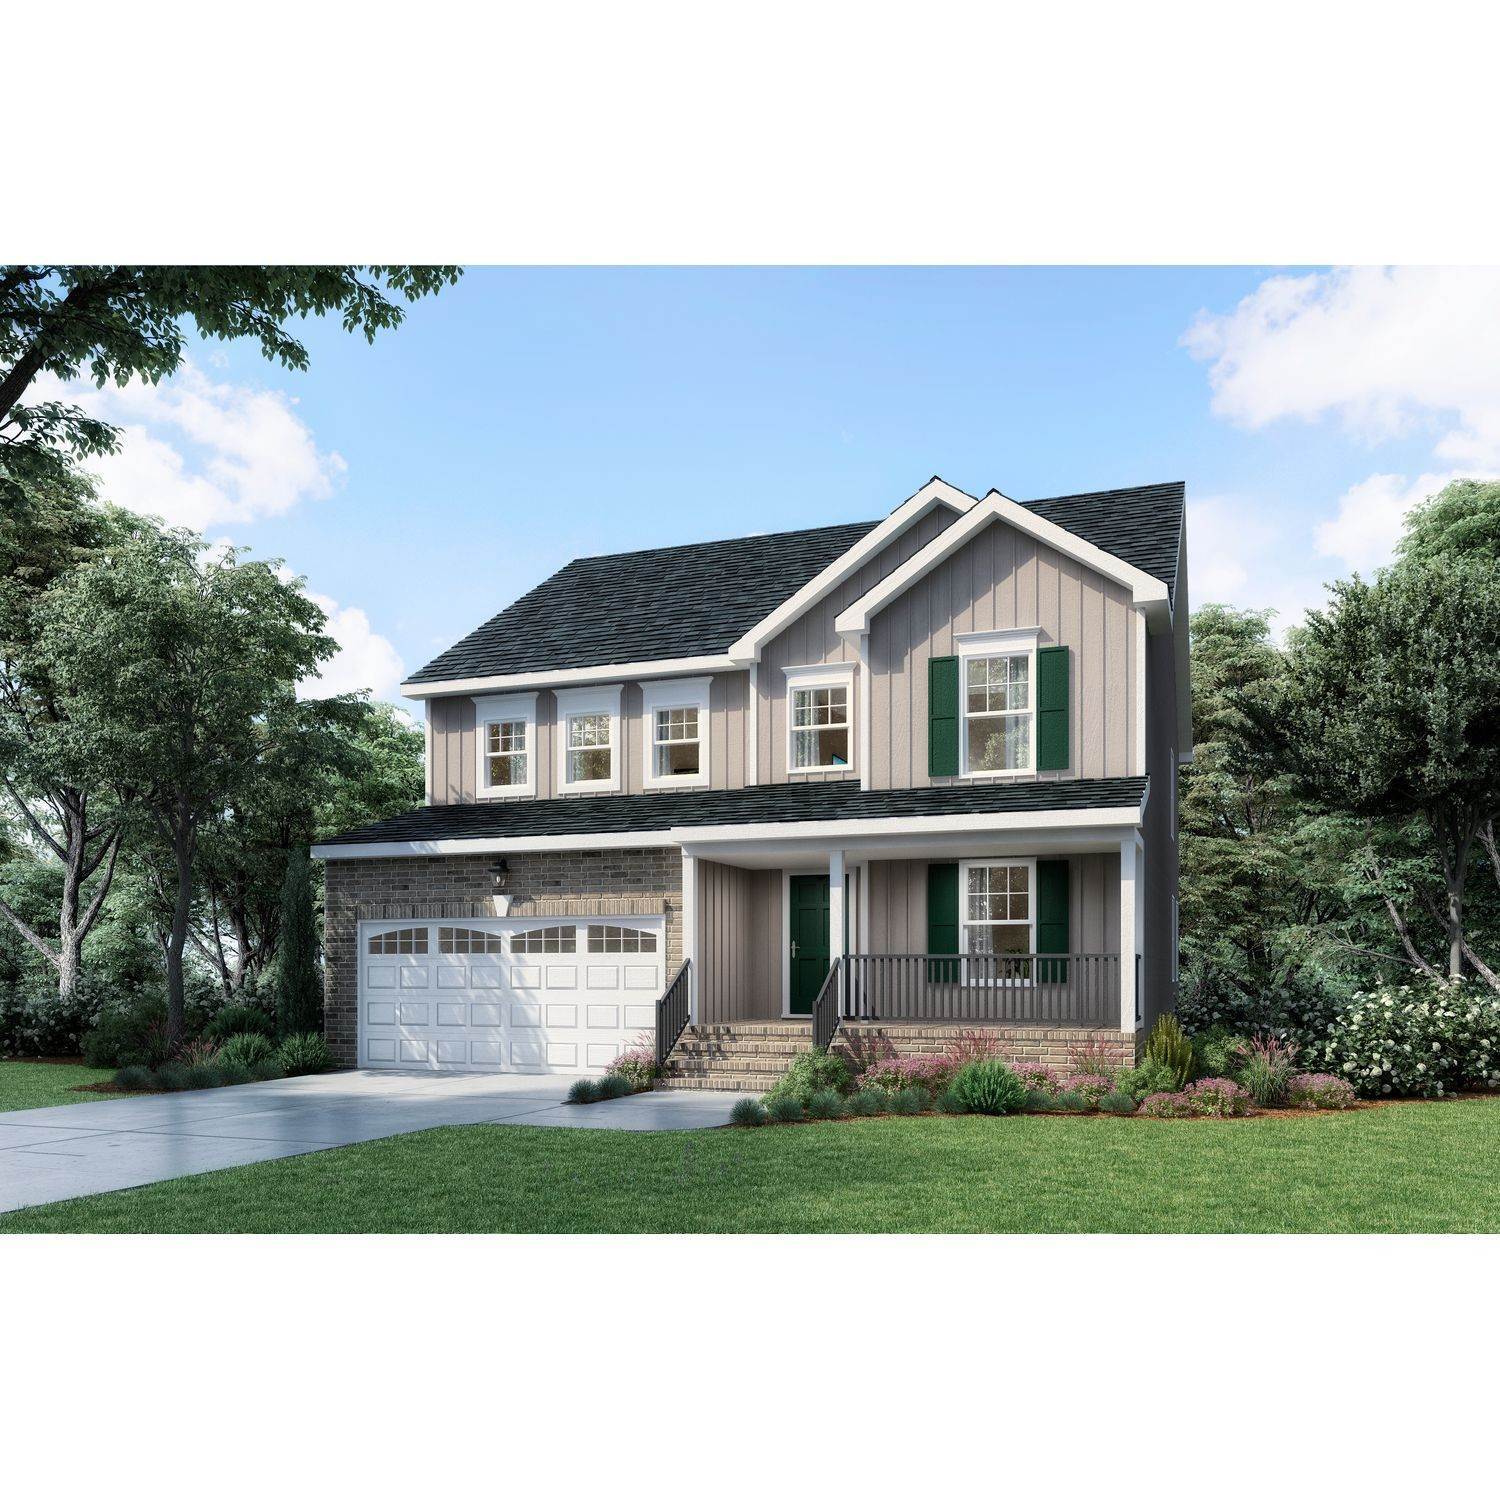 26. Single Family for Sale at Chester, VA 23831